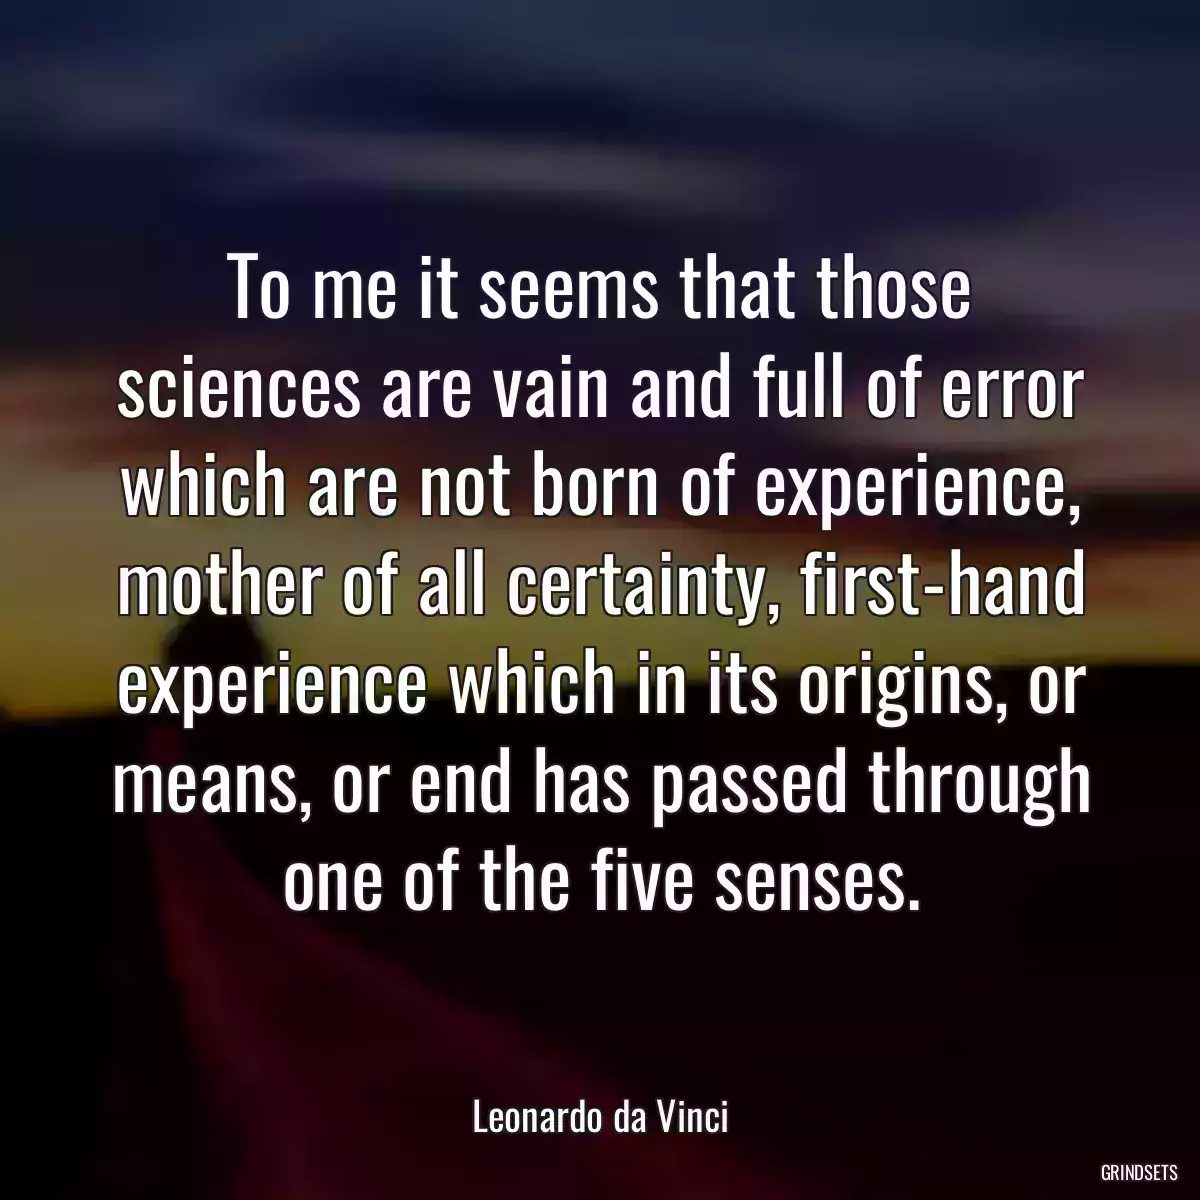 To me it seems that those sciences are vain and full of error which are not born of experience, mother of all certainty, first-hand experience which in its origins, or means, or end has passed through one of the five senses.